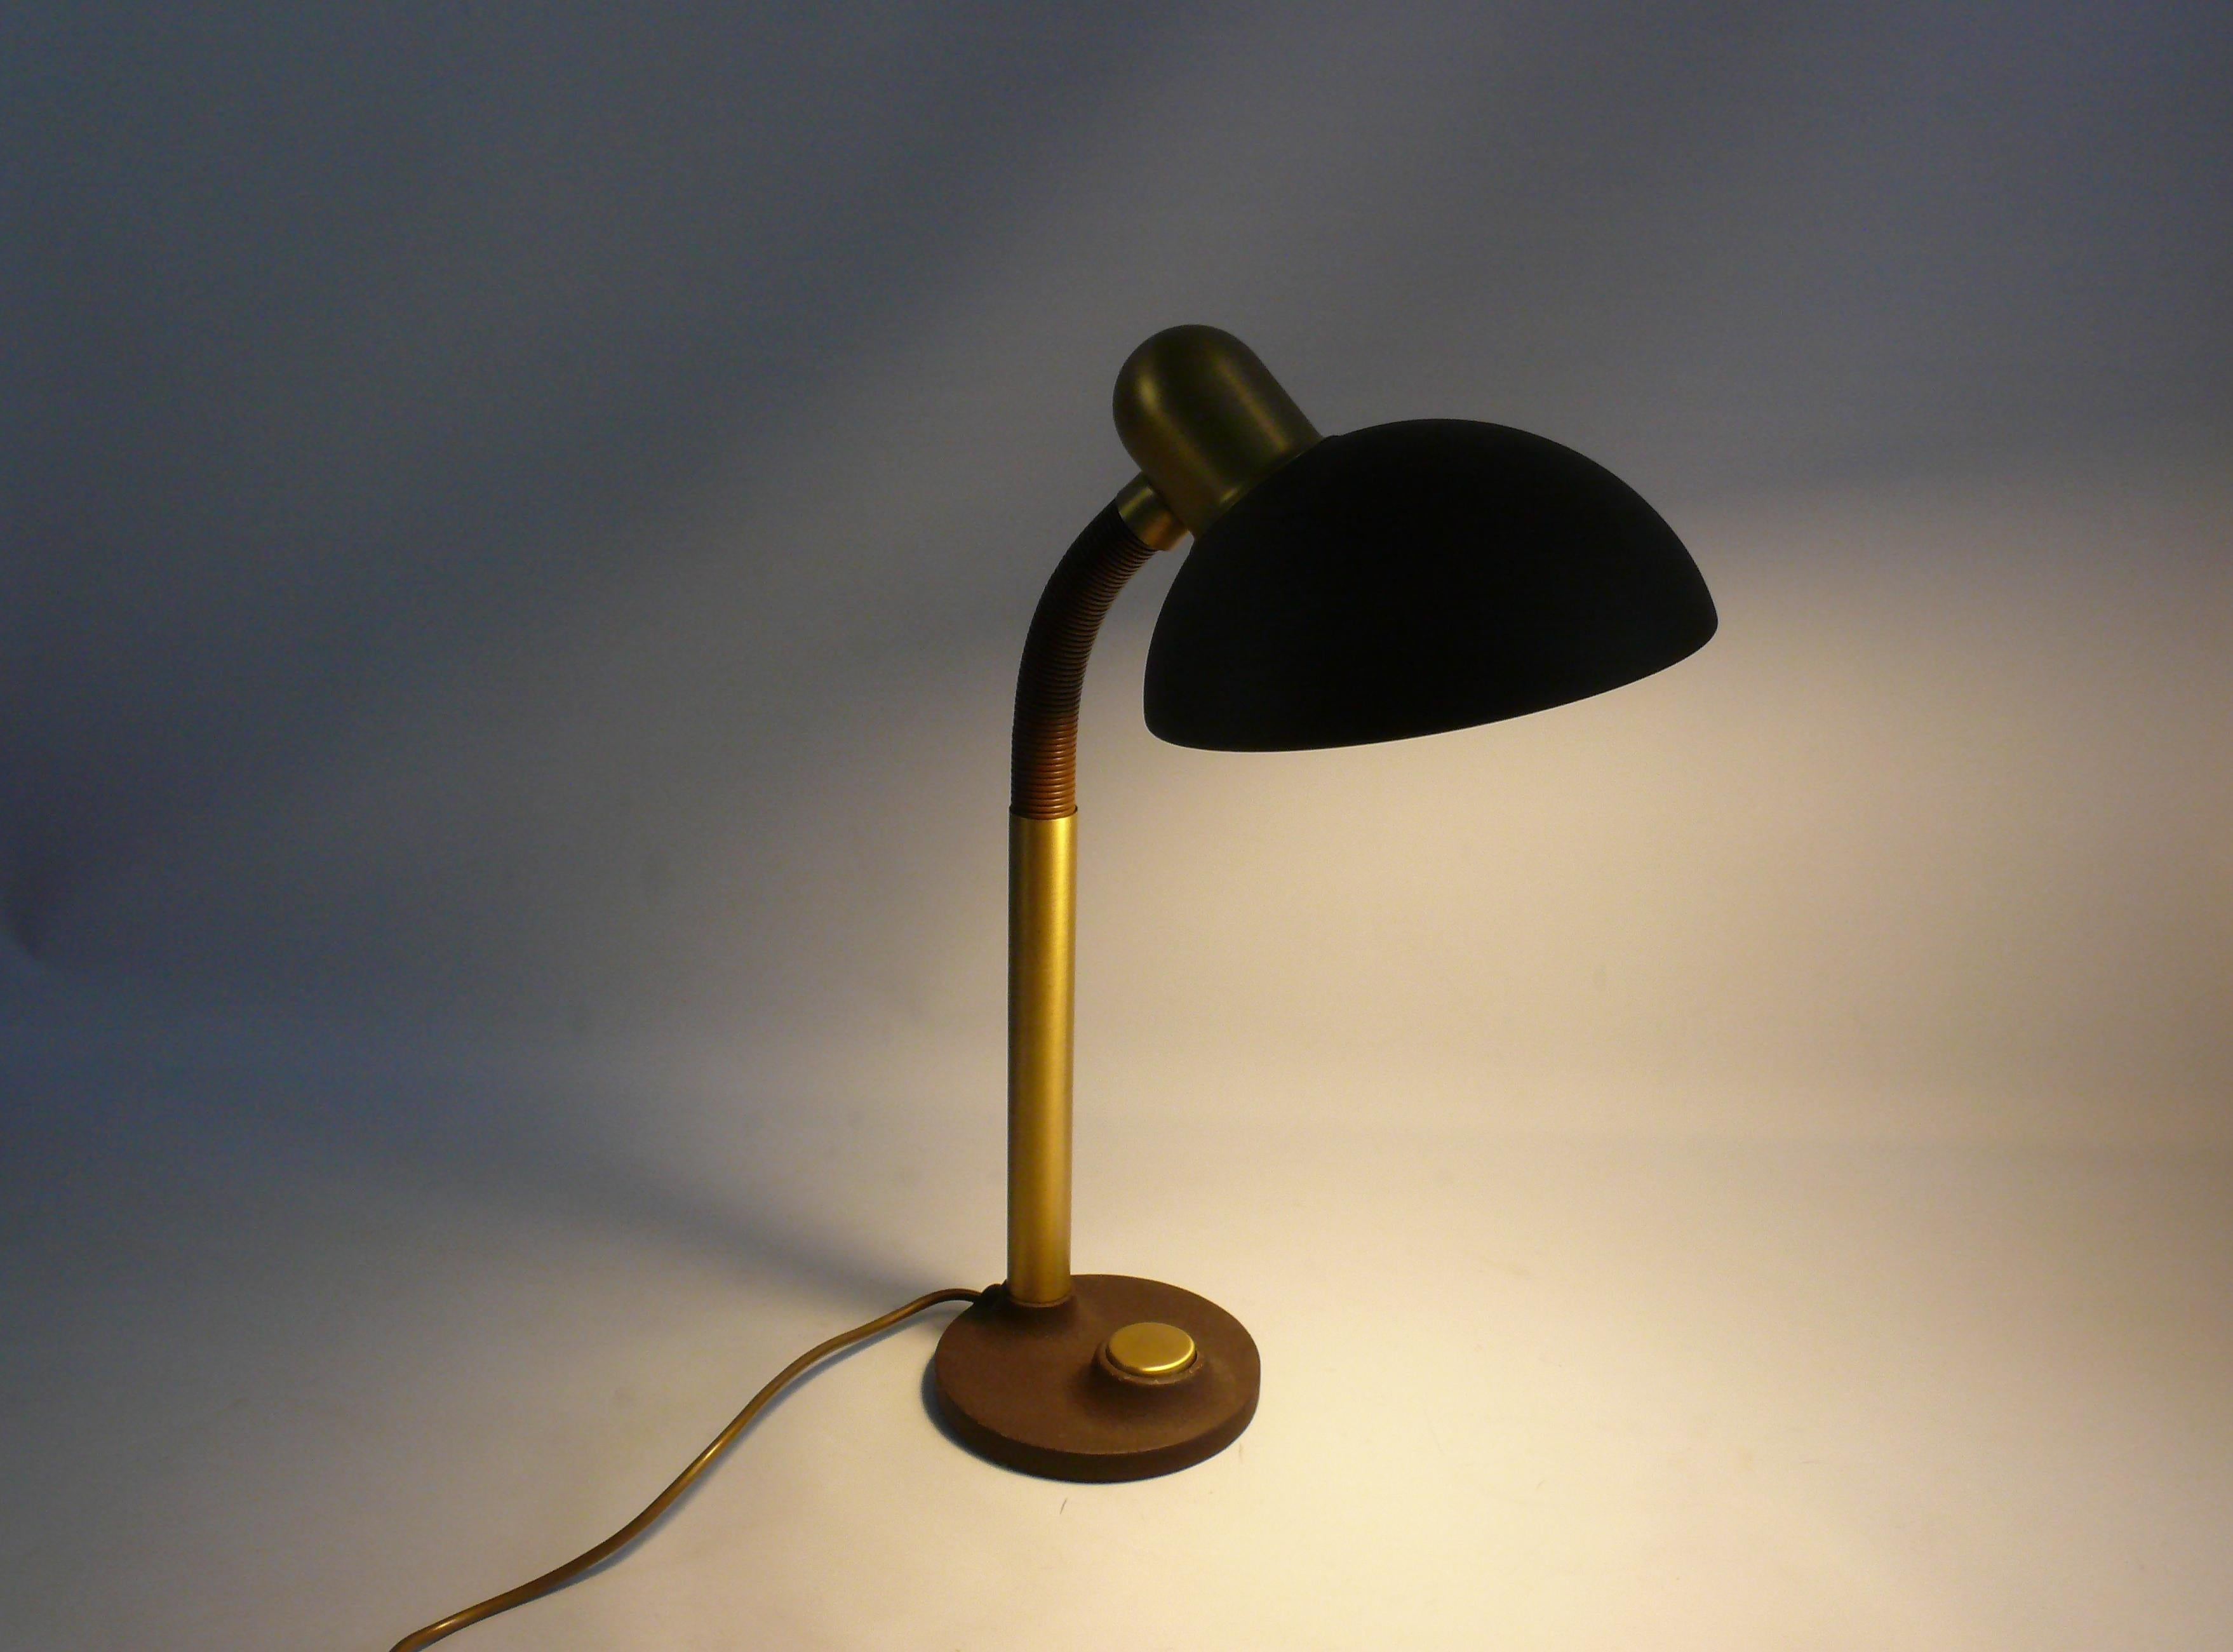 Rare, very large desk lamp from the 1960s - 1970s by Egon Hillebrand, model 7630. The lamp is made of metal and brass and has a plastic-coated gooseneck. The desk lamp is large, heavy and very solid. The paint is matt brown and the cable is gold.